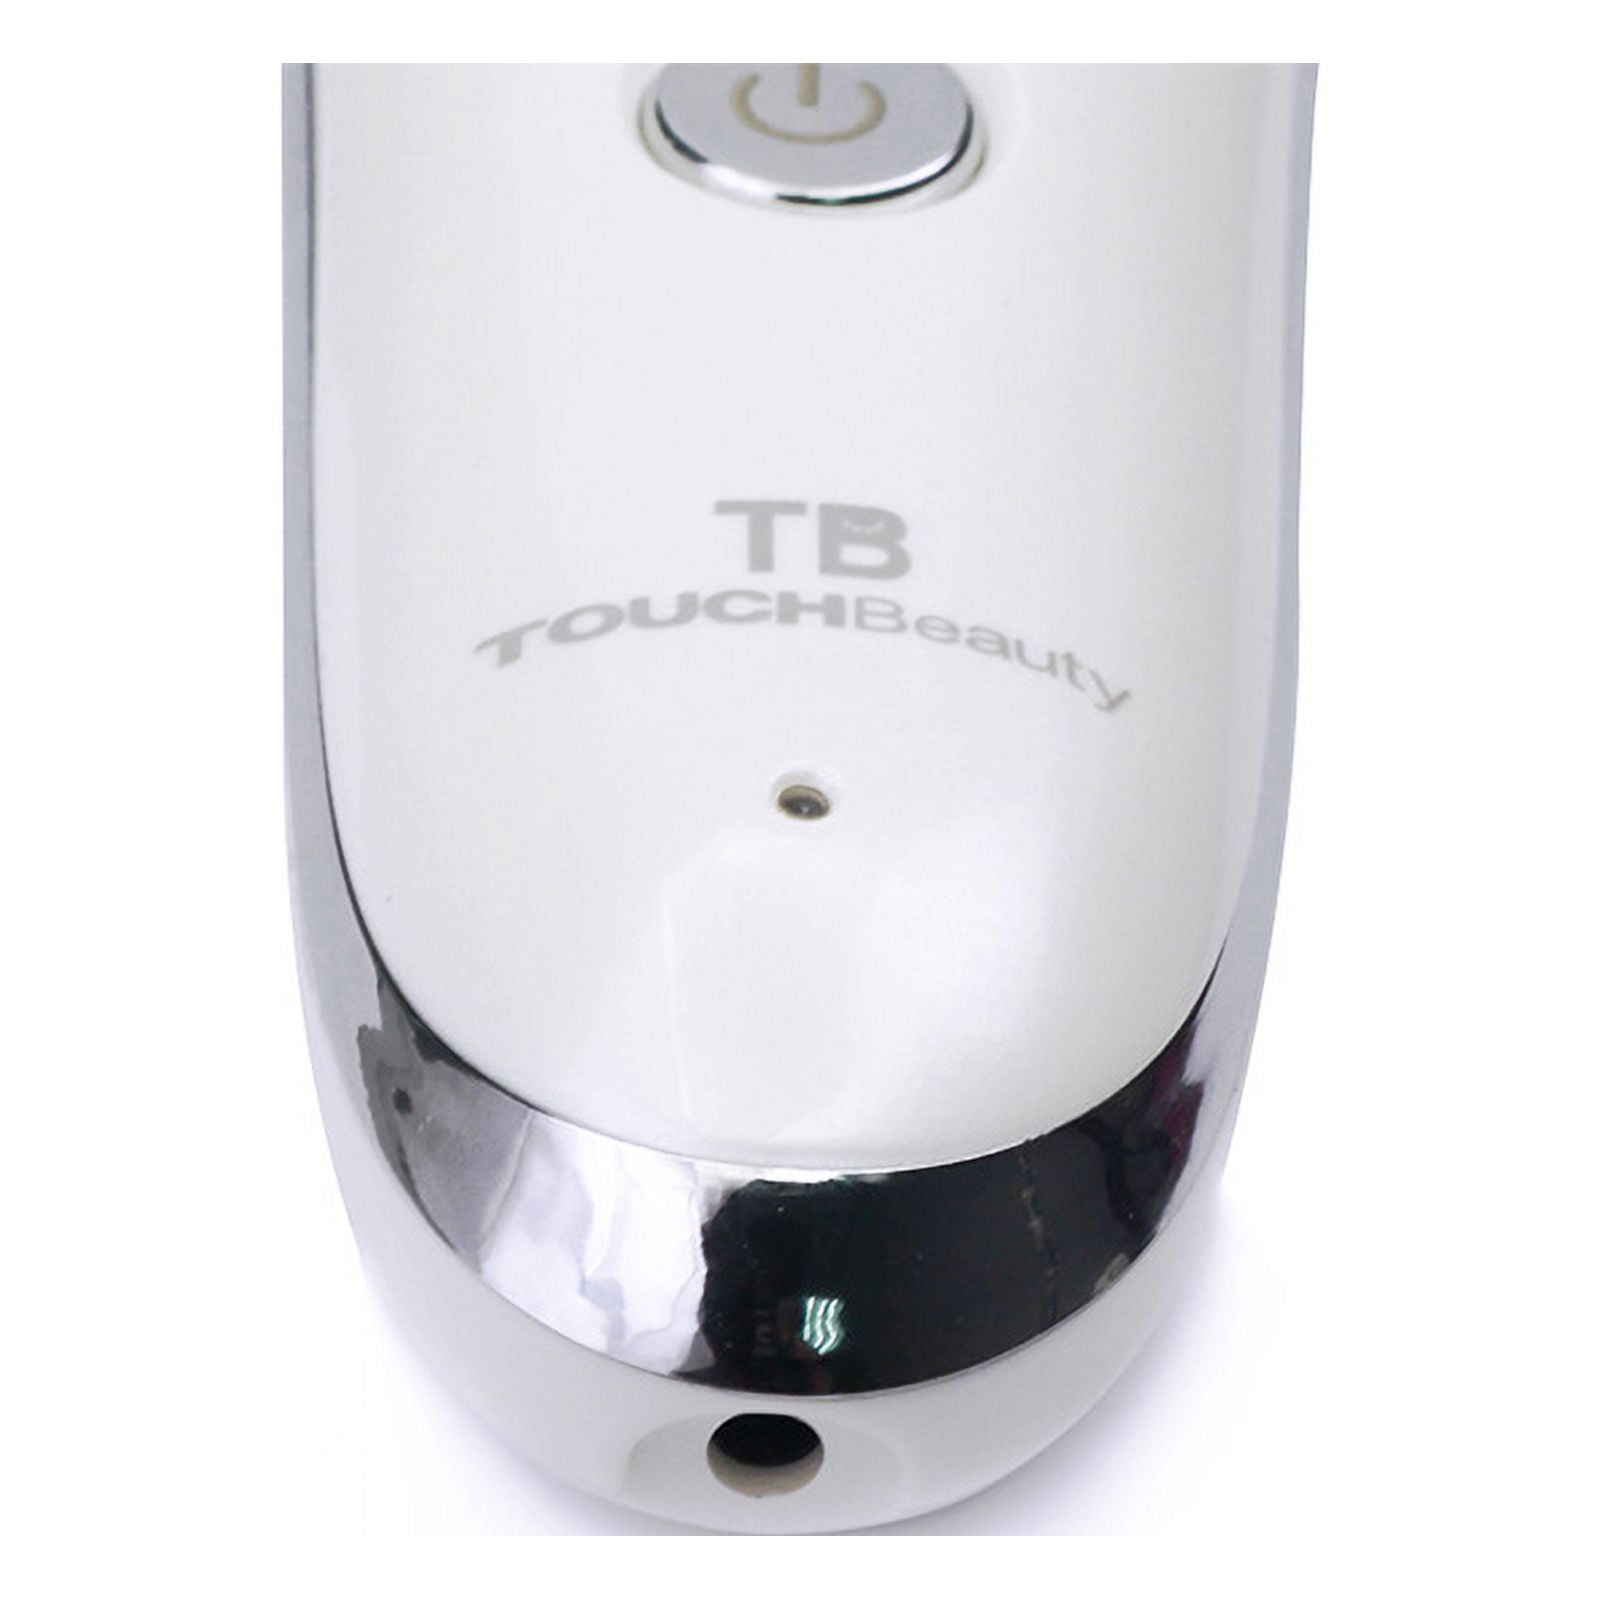 TB-1389 Hot Home & Cool Beauty Fashions Touch Elegant Massager